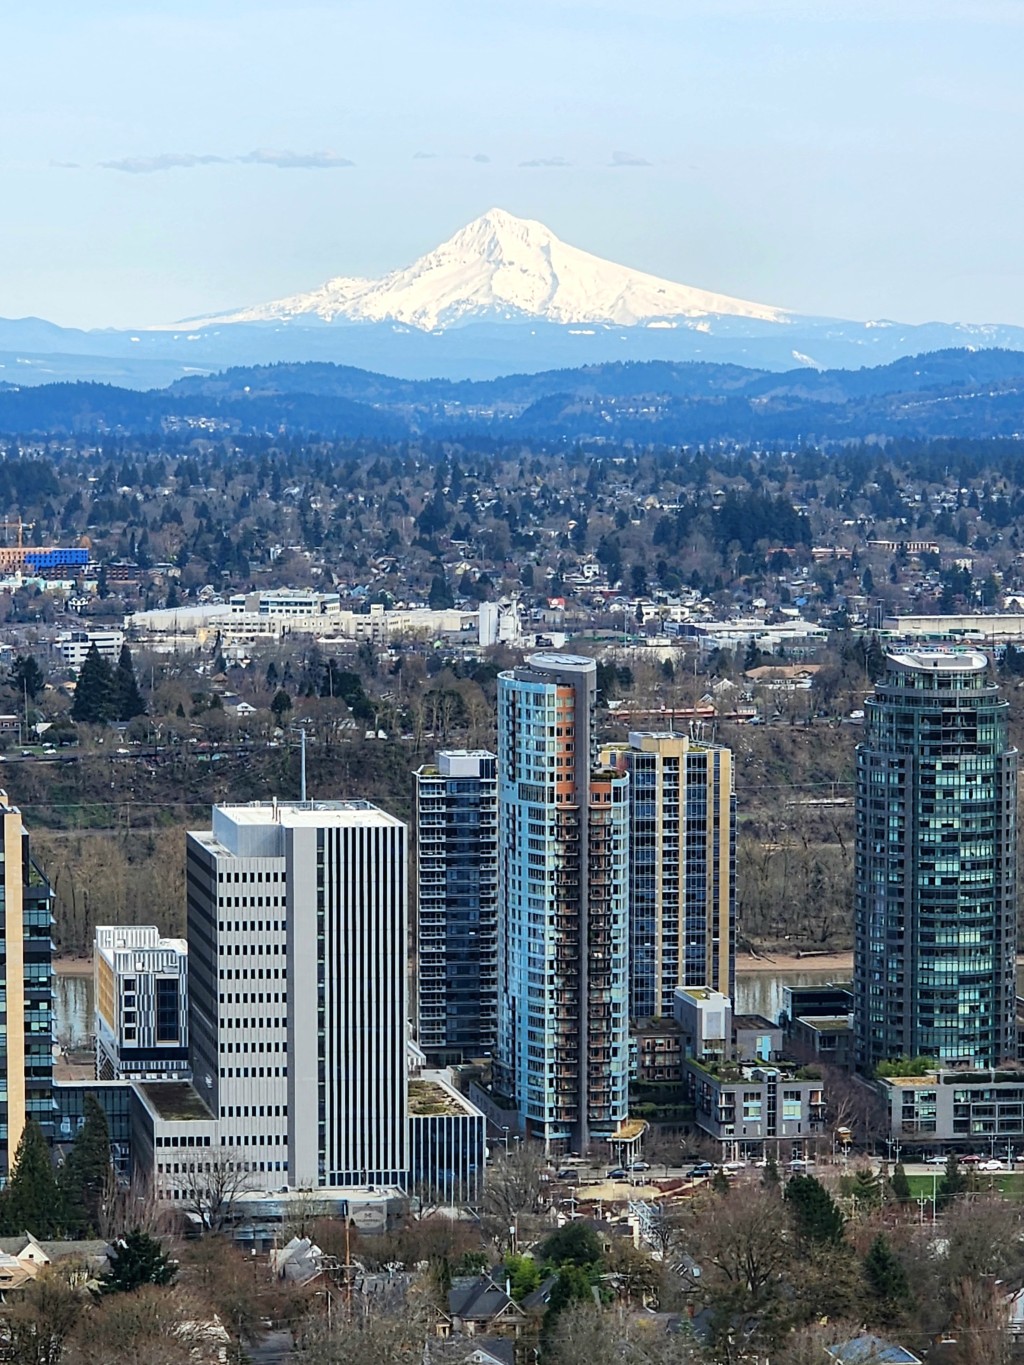 A view of Mt. Hood from Portland, Oregon